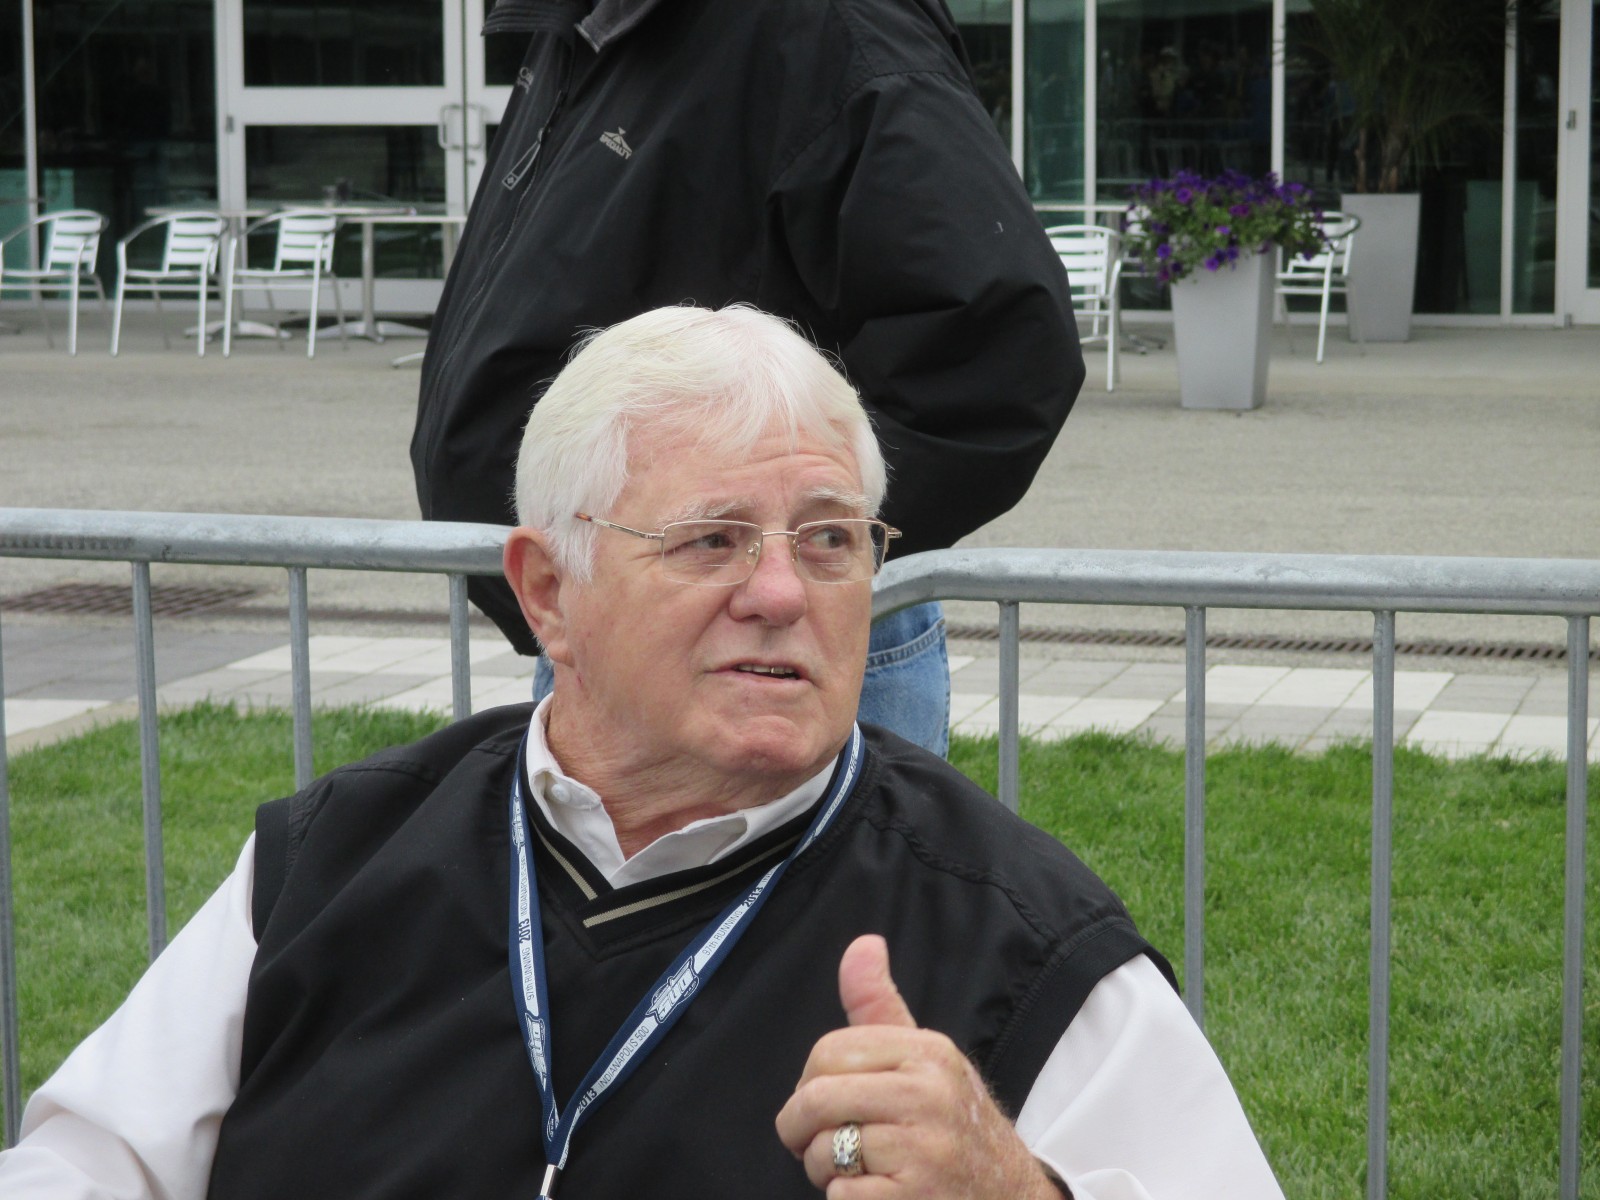 Bill Puterbaugh in 2013 at Indy Legends Day